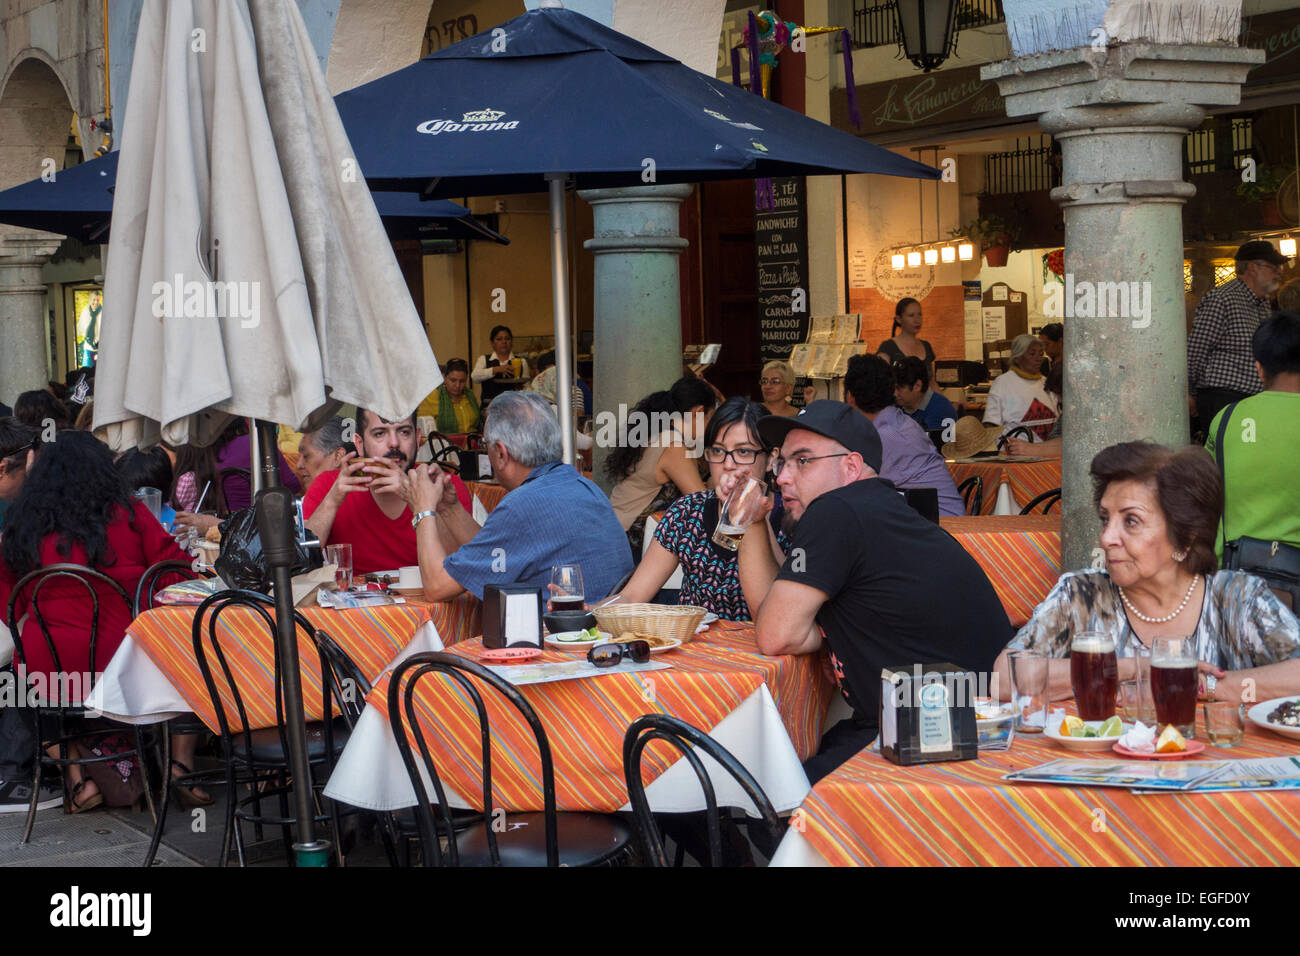 People sit in an outdoor restaurant in the Zocalo in Oaxaca, Mexico Stock Photo